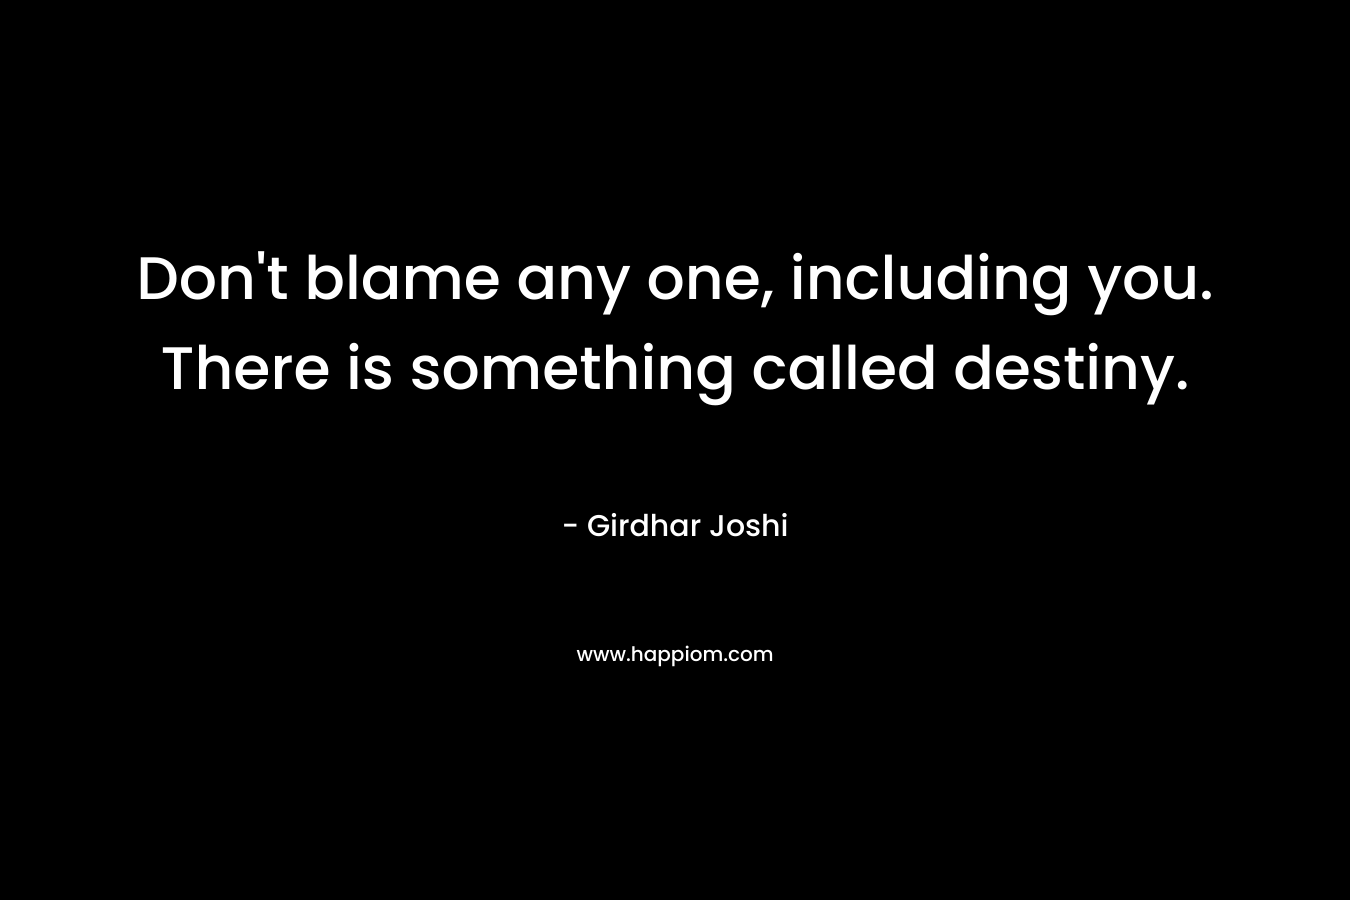 Don't blame any one, including you. There is something called destiny.